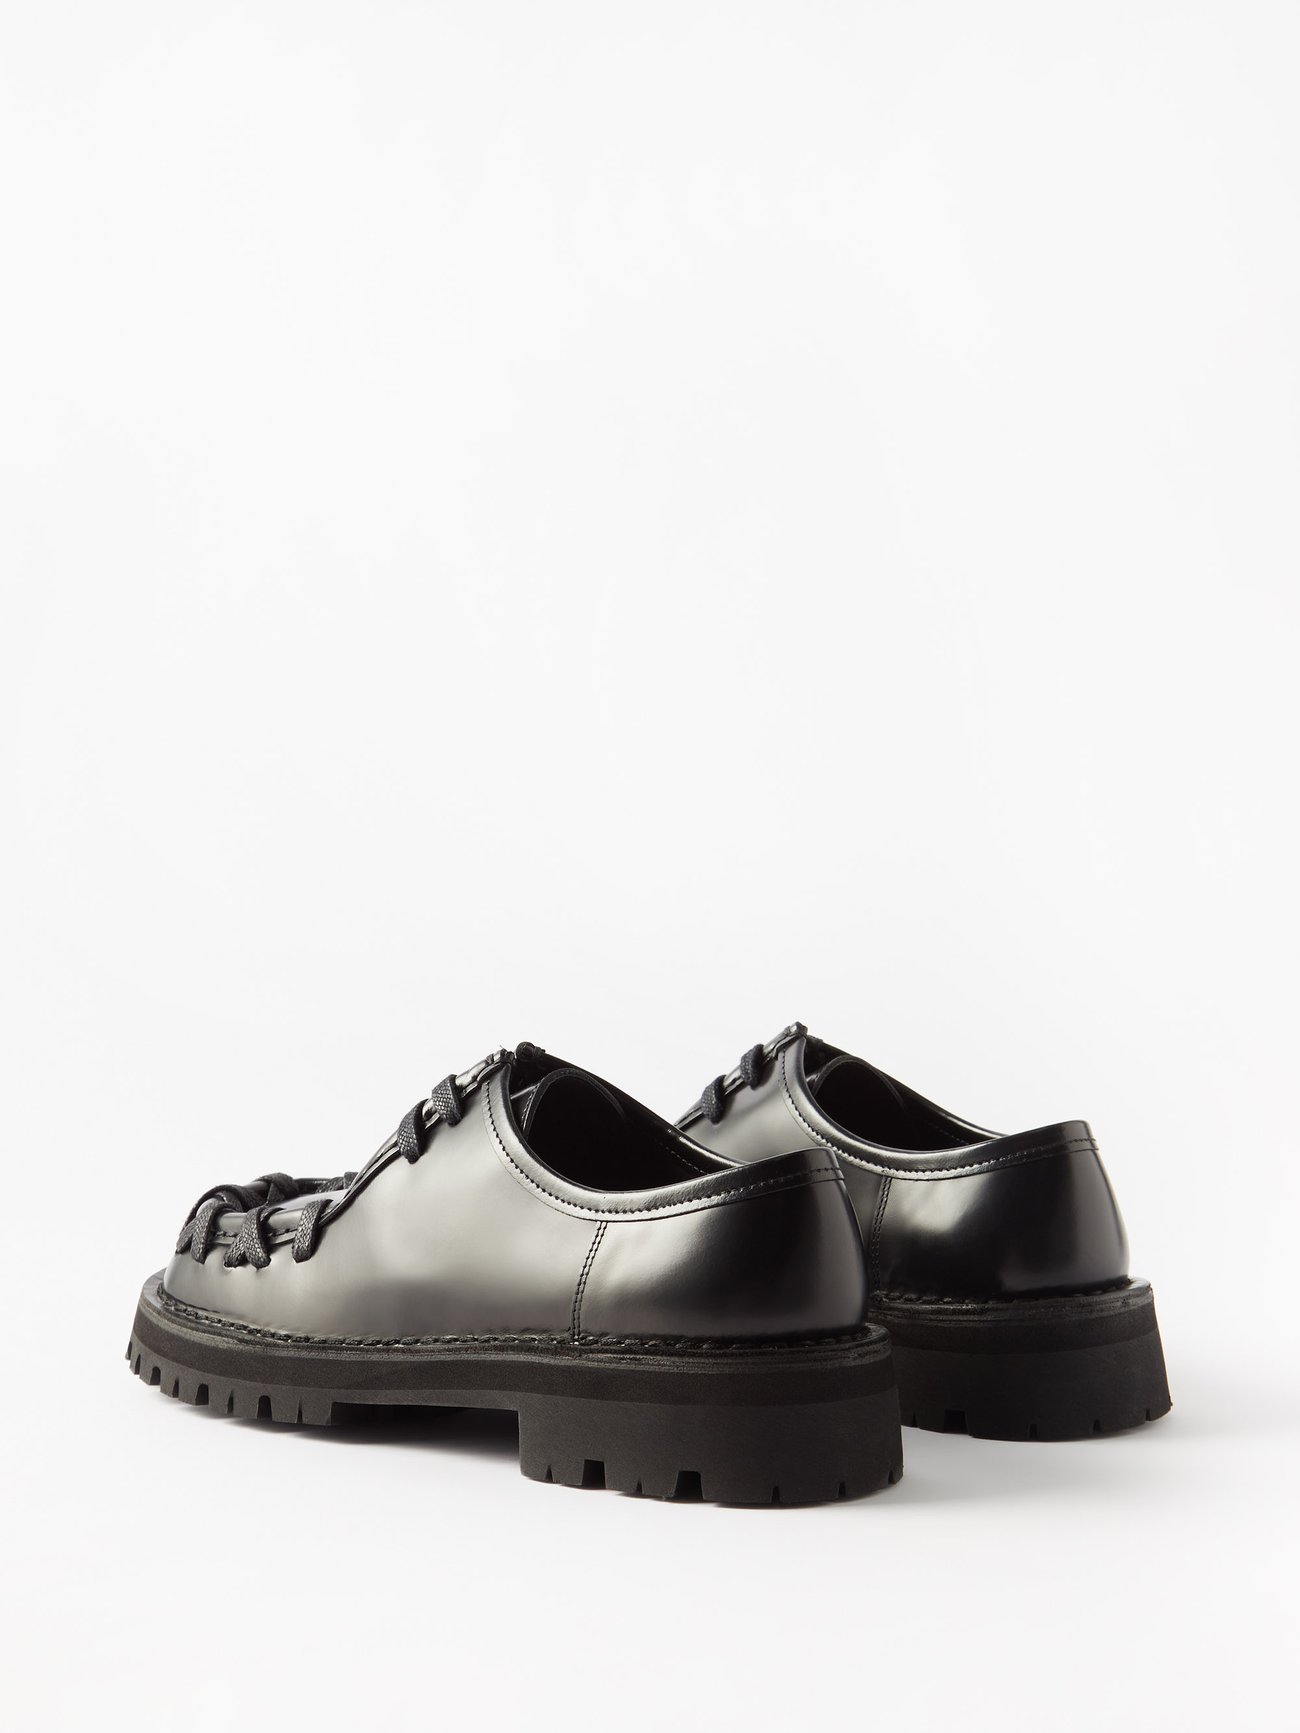 MATCHES leather CAMPERLAB shoes | Derby | Mimi UK Black